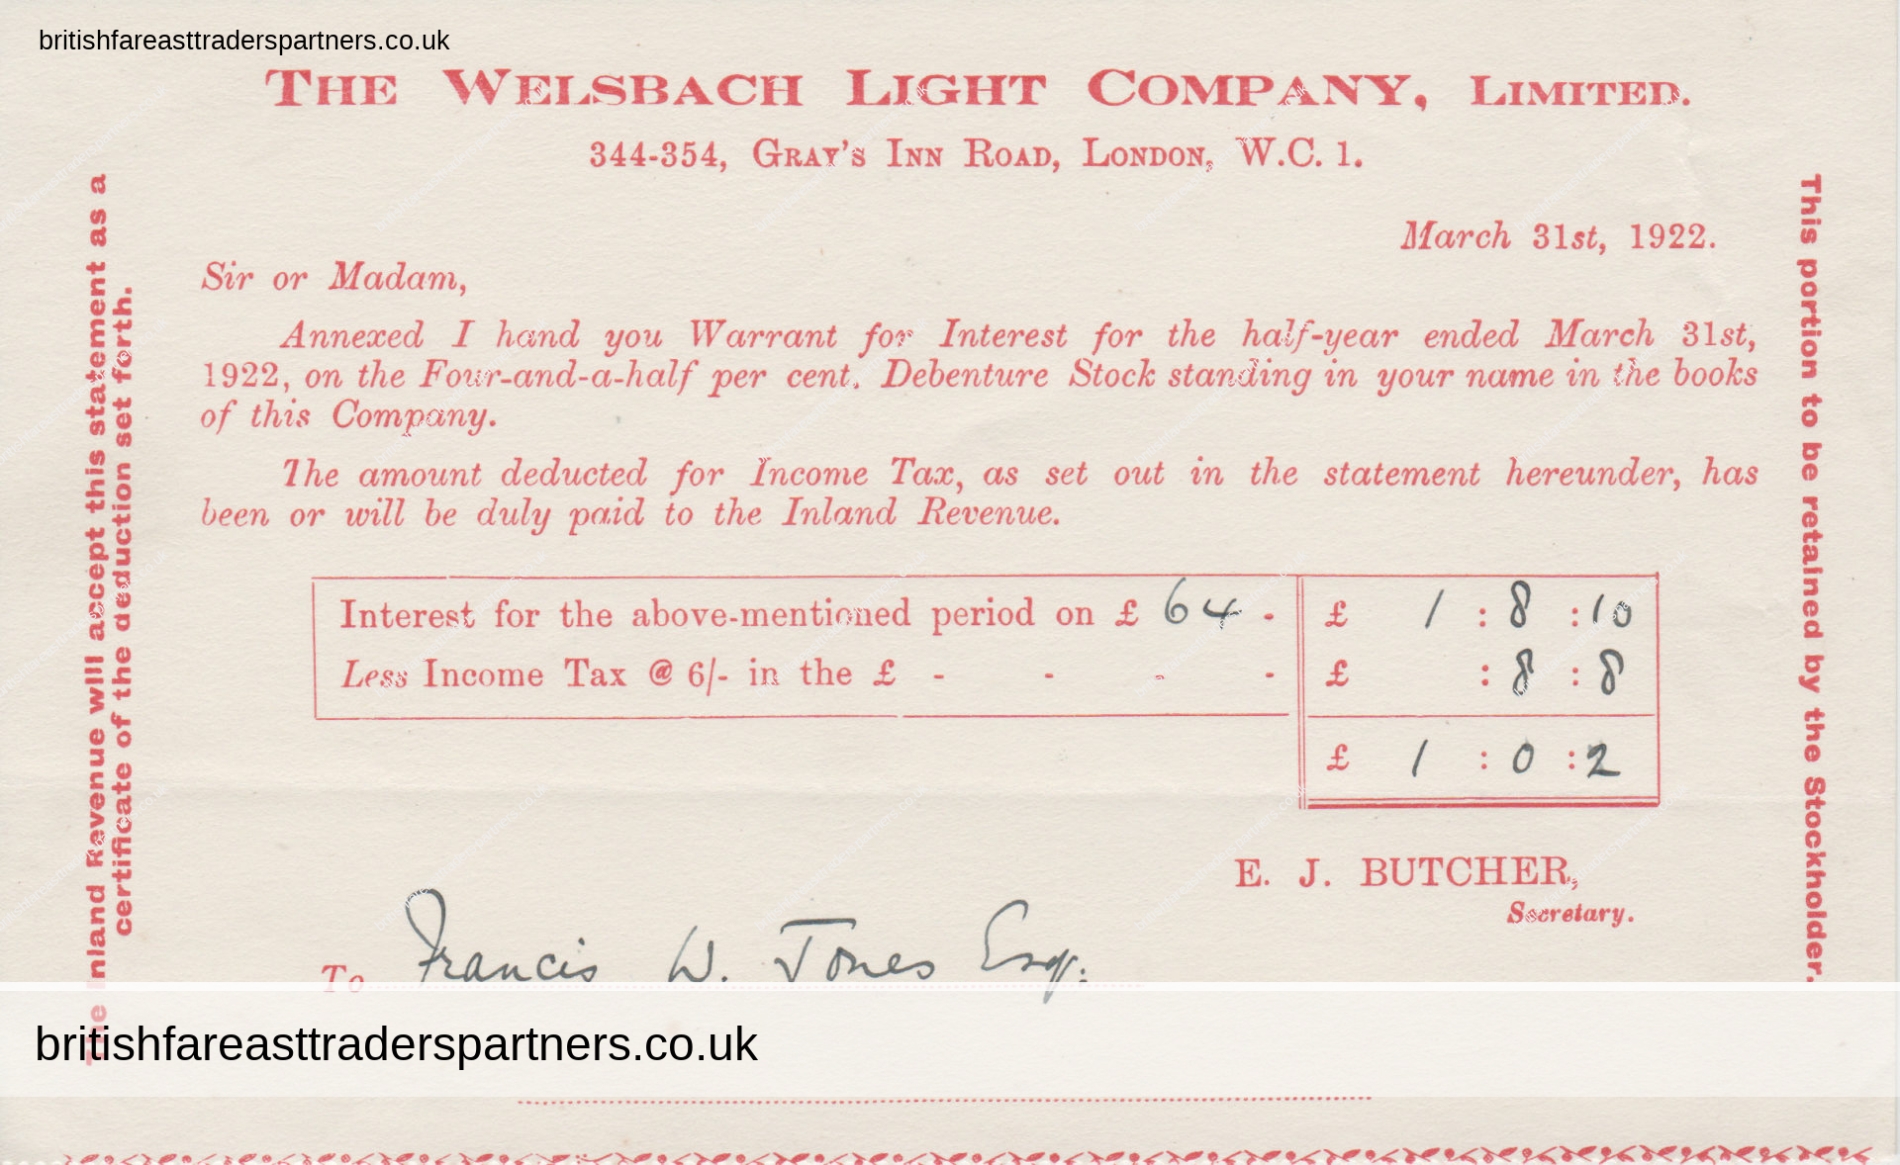 VINTAGE 1922 “THE WELSBACH LIGHT COMPANY LIMITED” LONDON WARRANT for INTEREST